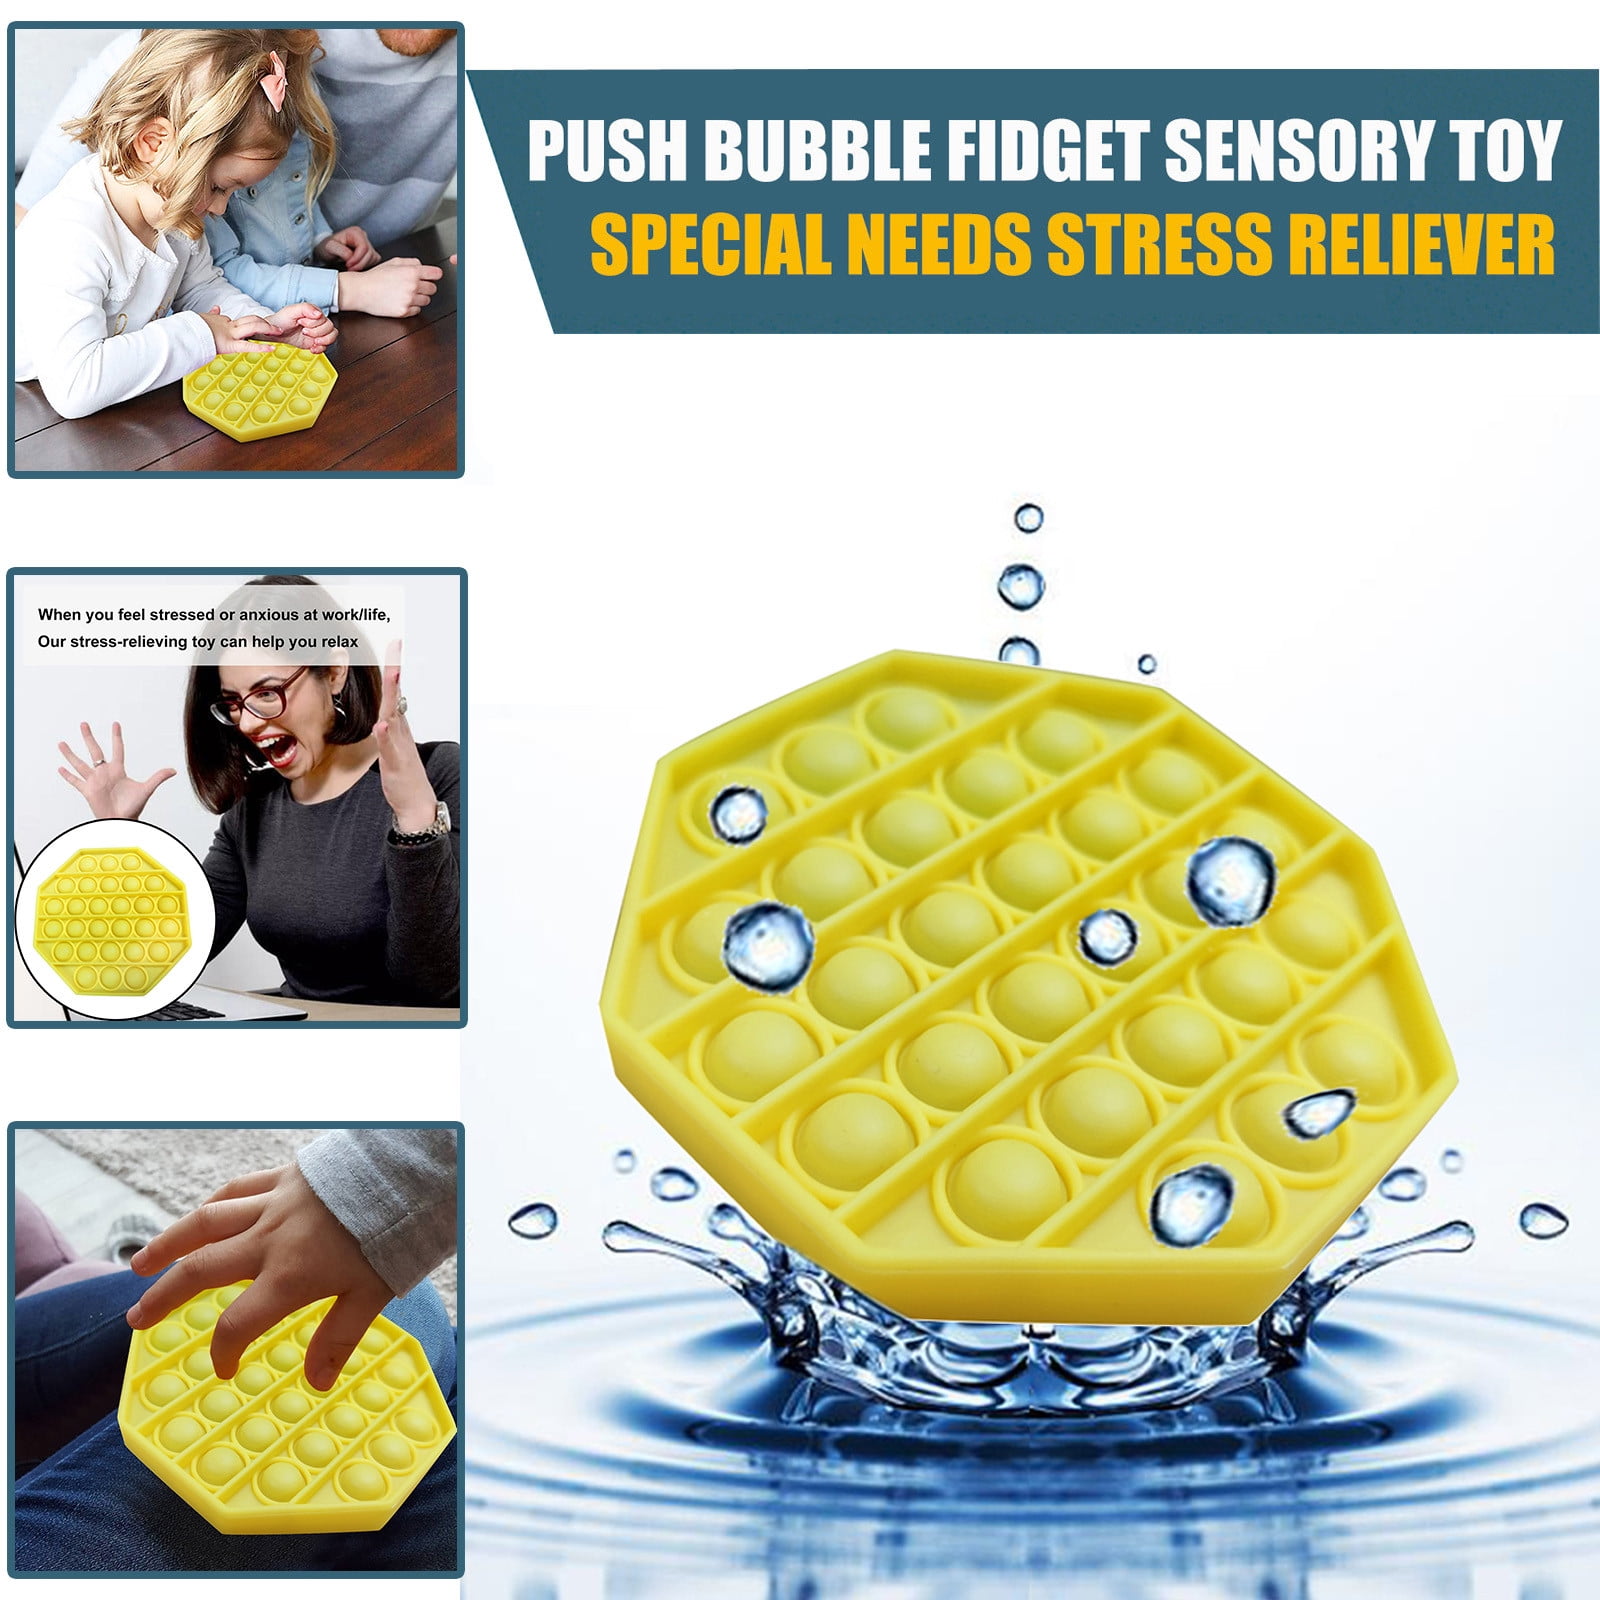 Details about   Pull blackhead Fidget Sensory Toy Stress Relief Toys Autism Anxiety Relief kids 